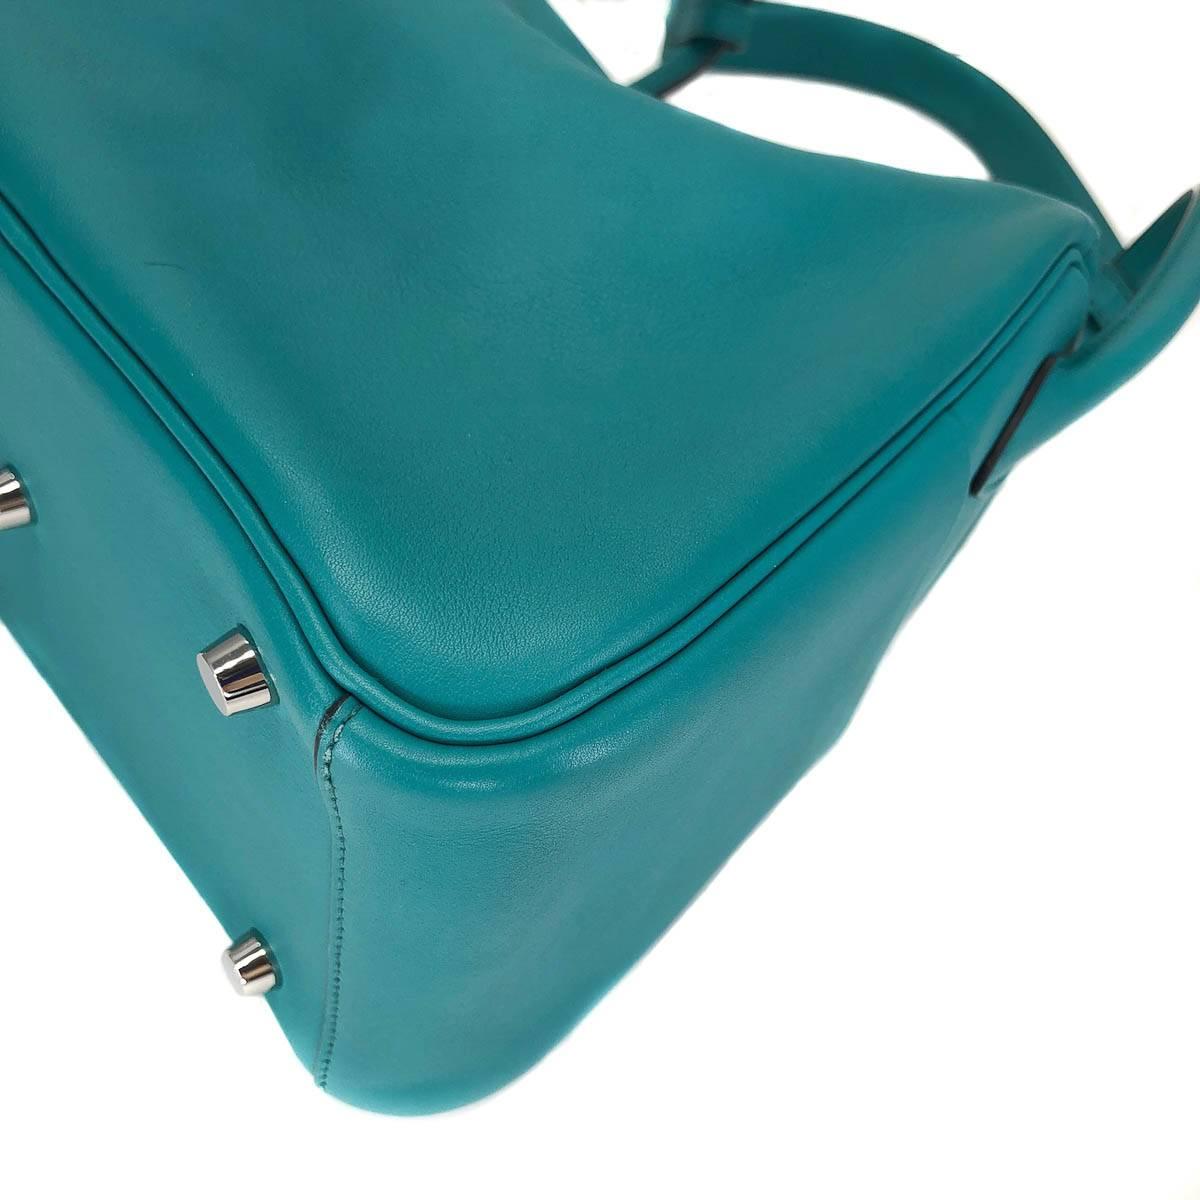 Hermes Handbag Lindy 26 in Blue Lagoon Turquoise Swift Leather with Palladium hw For Sale 1